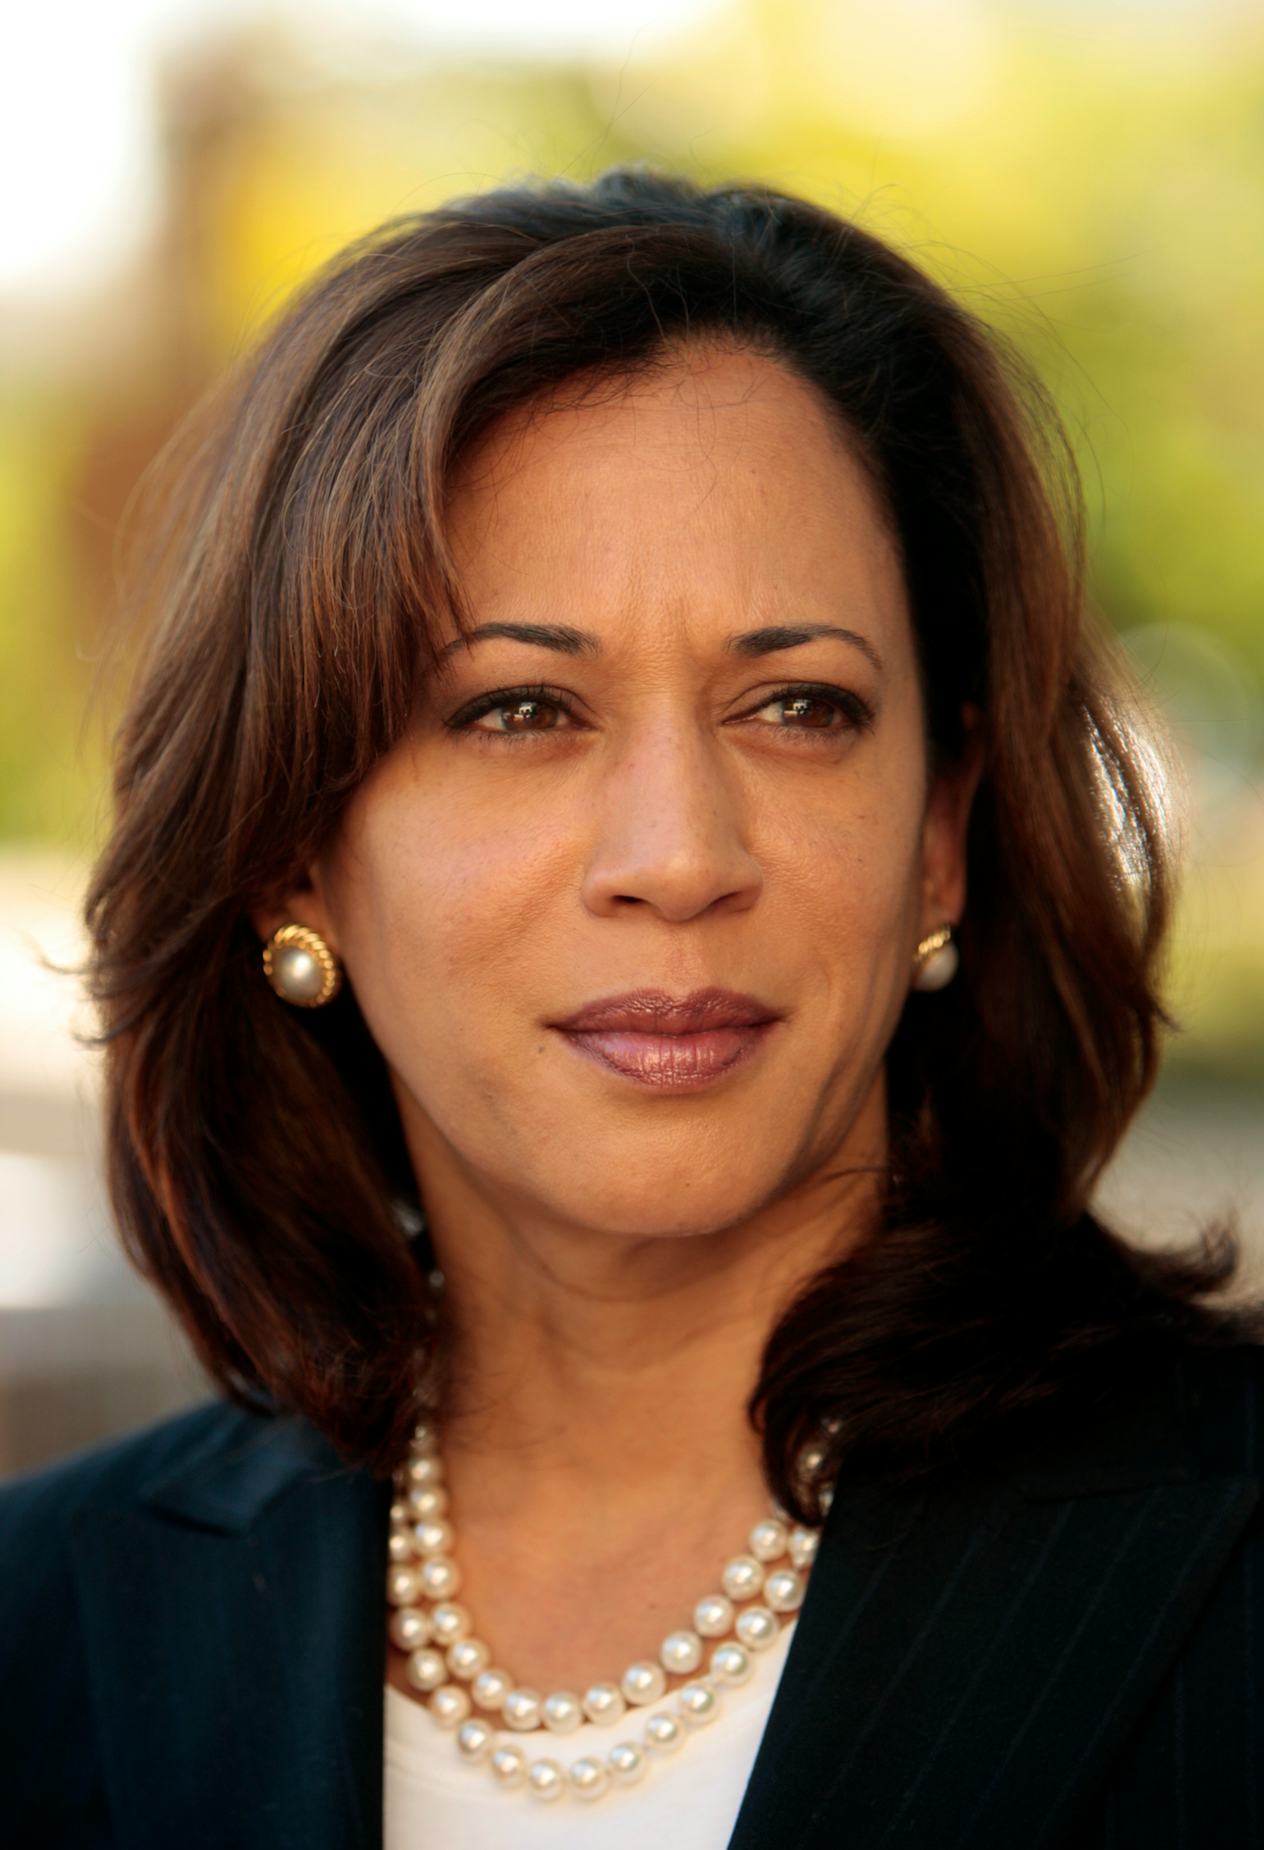 25 Kamala Harris' Outfits That Prove She's The Best At Power Dressing